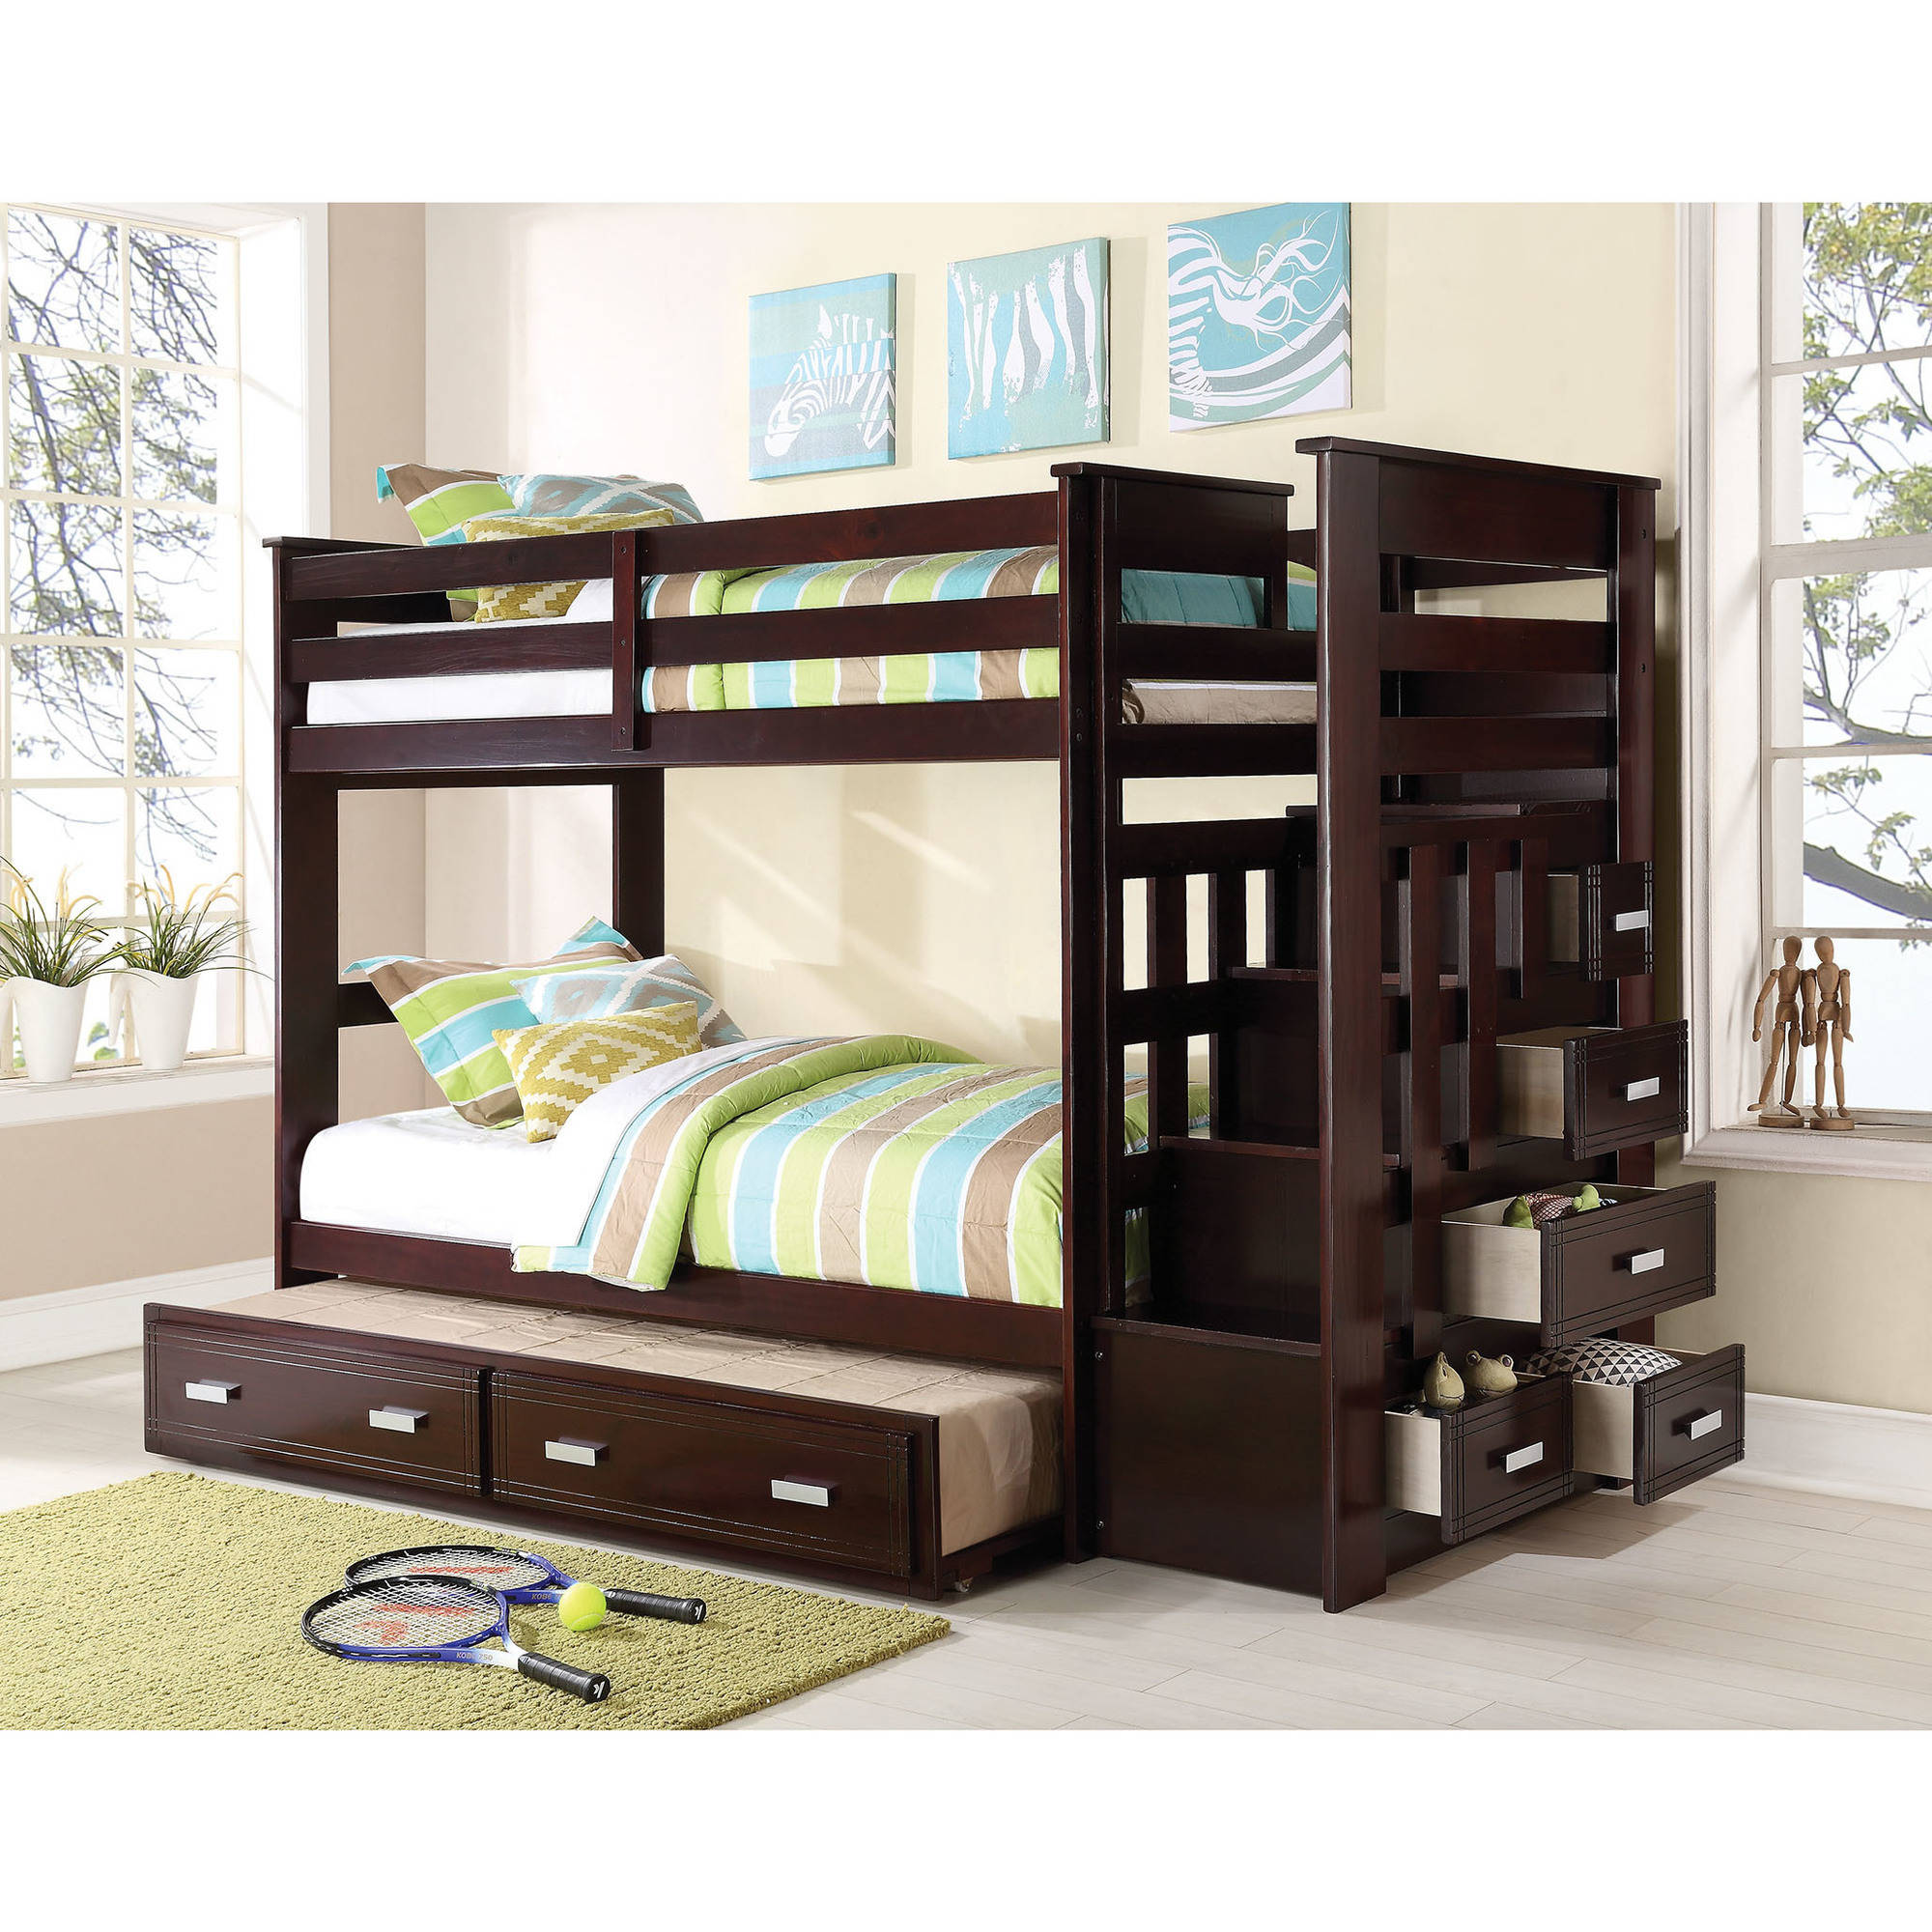 Acme Furniture Allentown Twin Over Twin Wood Bunk Bed with Storage, Espresso - image 1 of 7